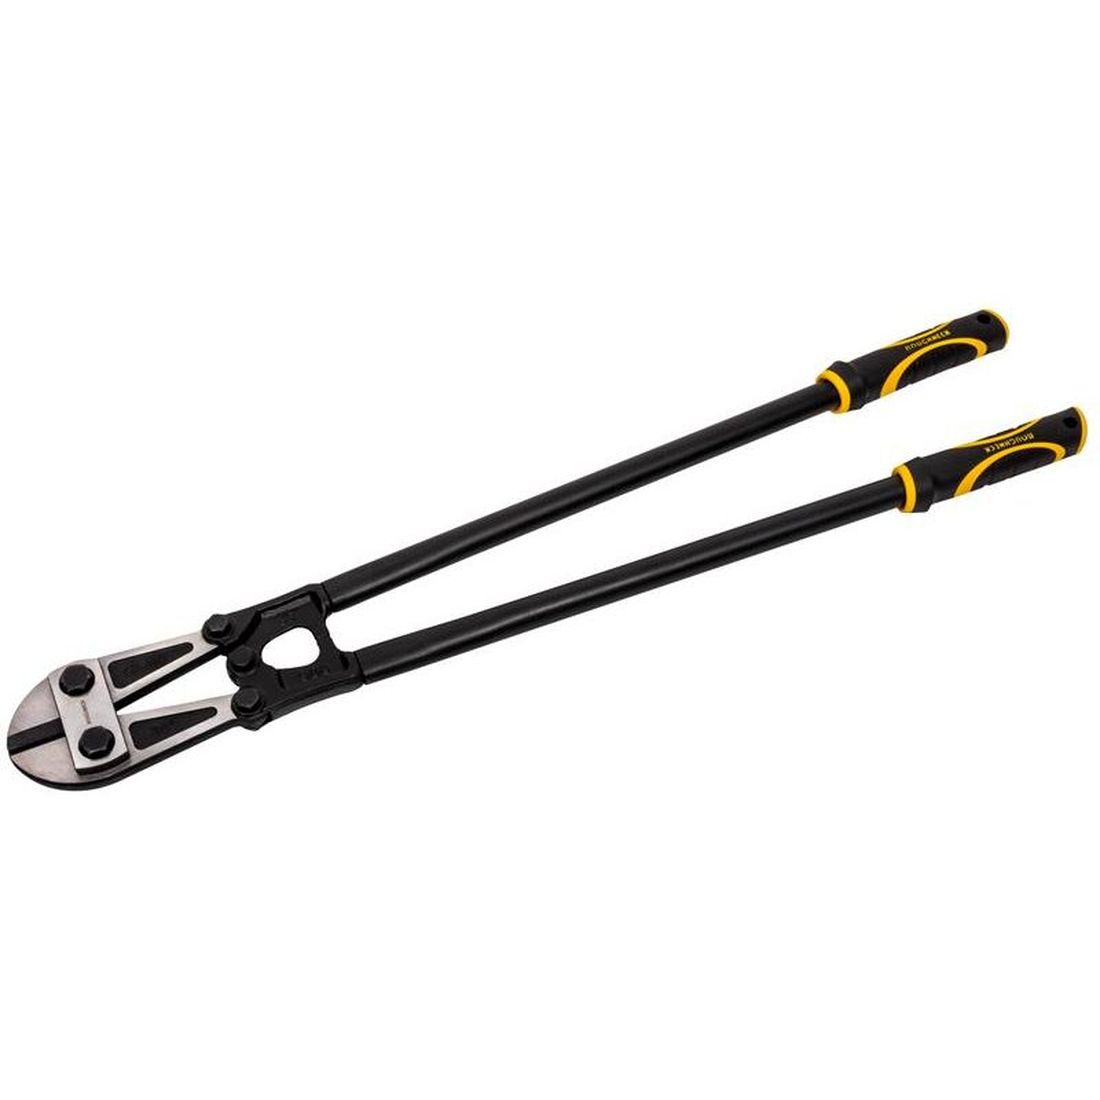 Roughneck Professional Bolt Cutters 900mm (36in)                                          